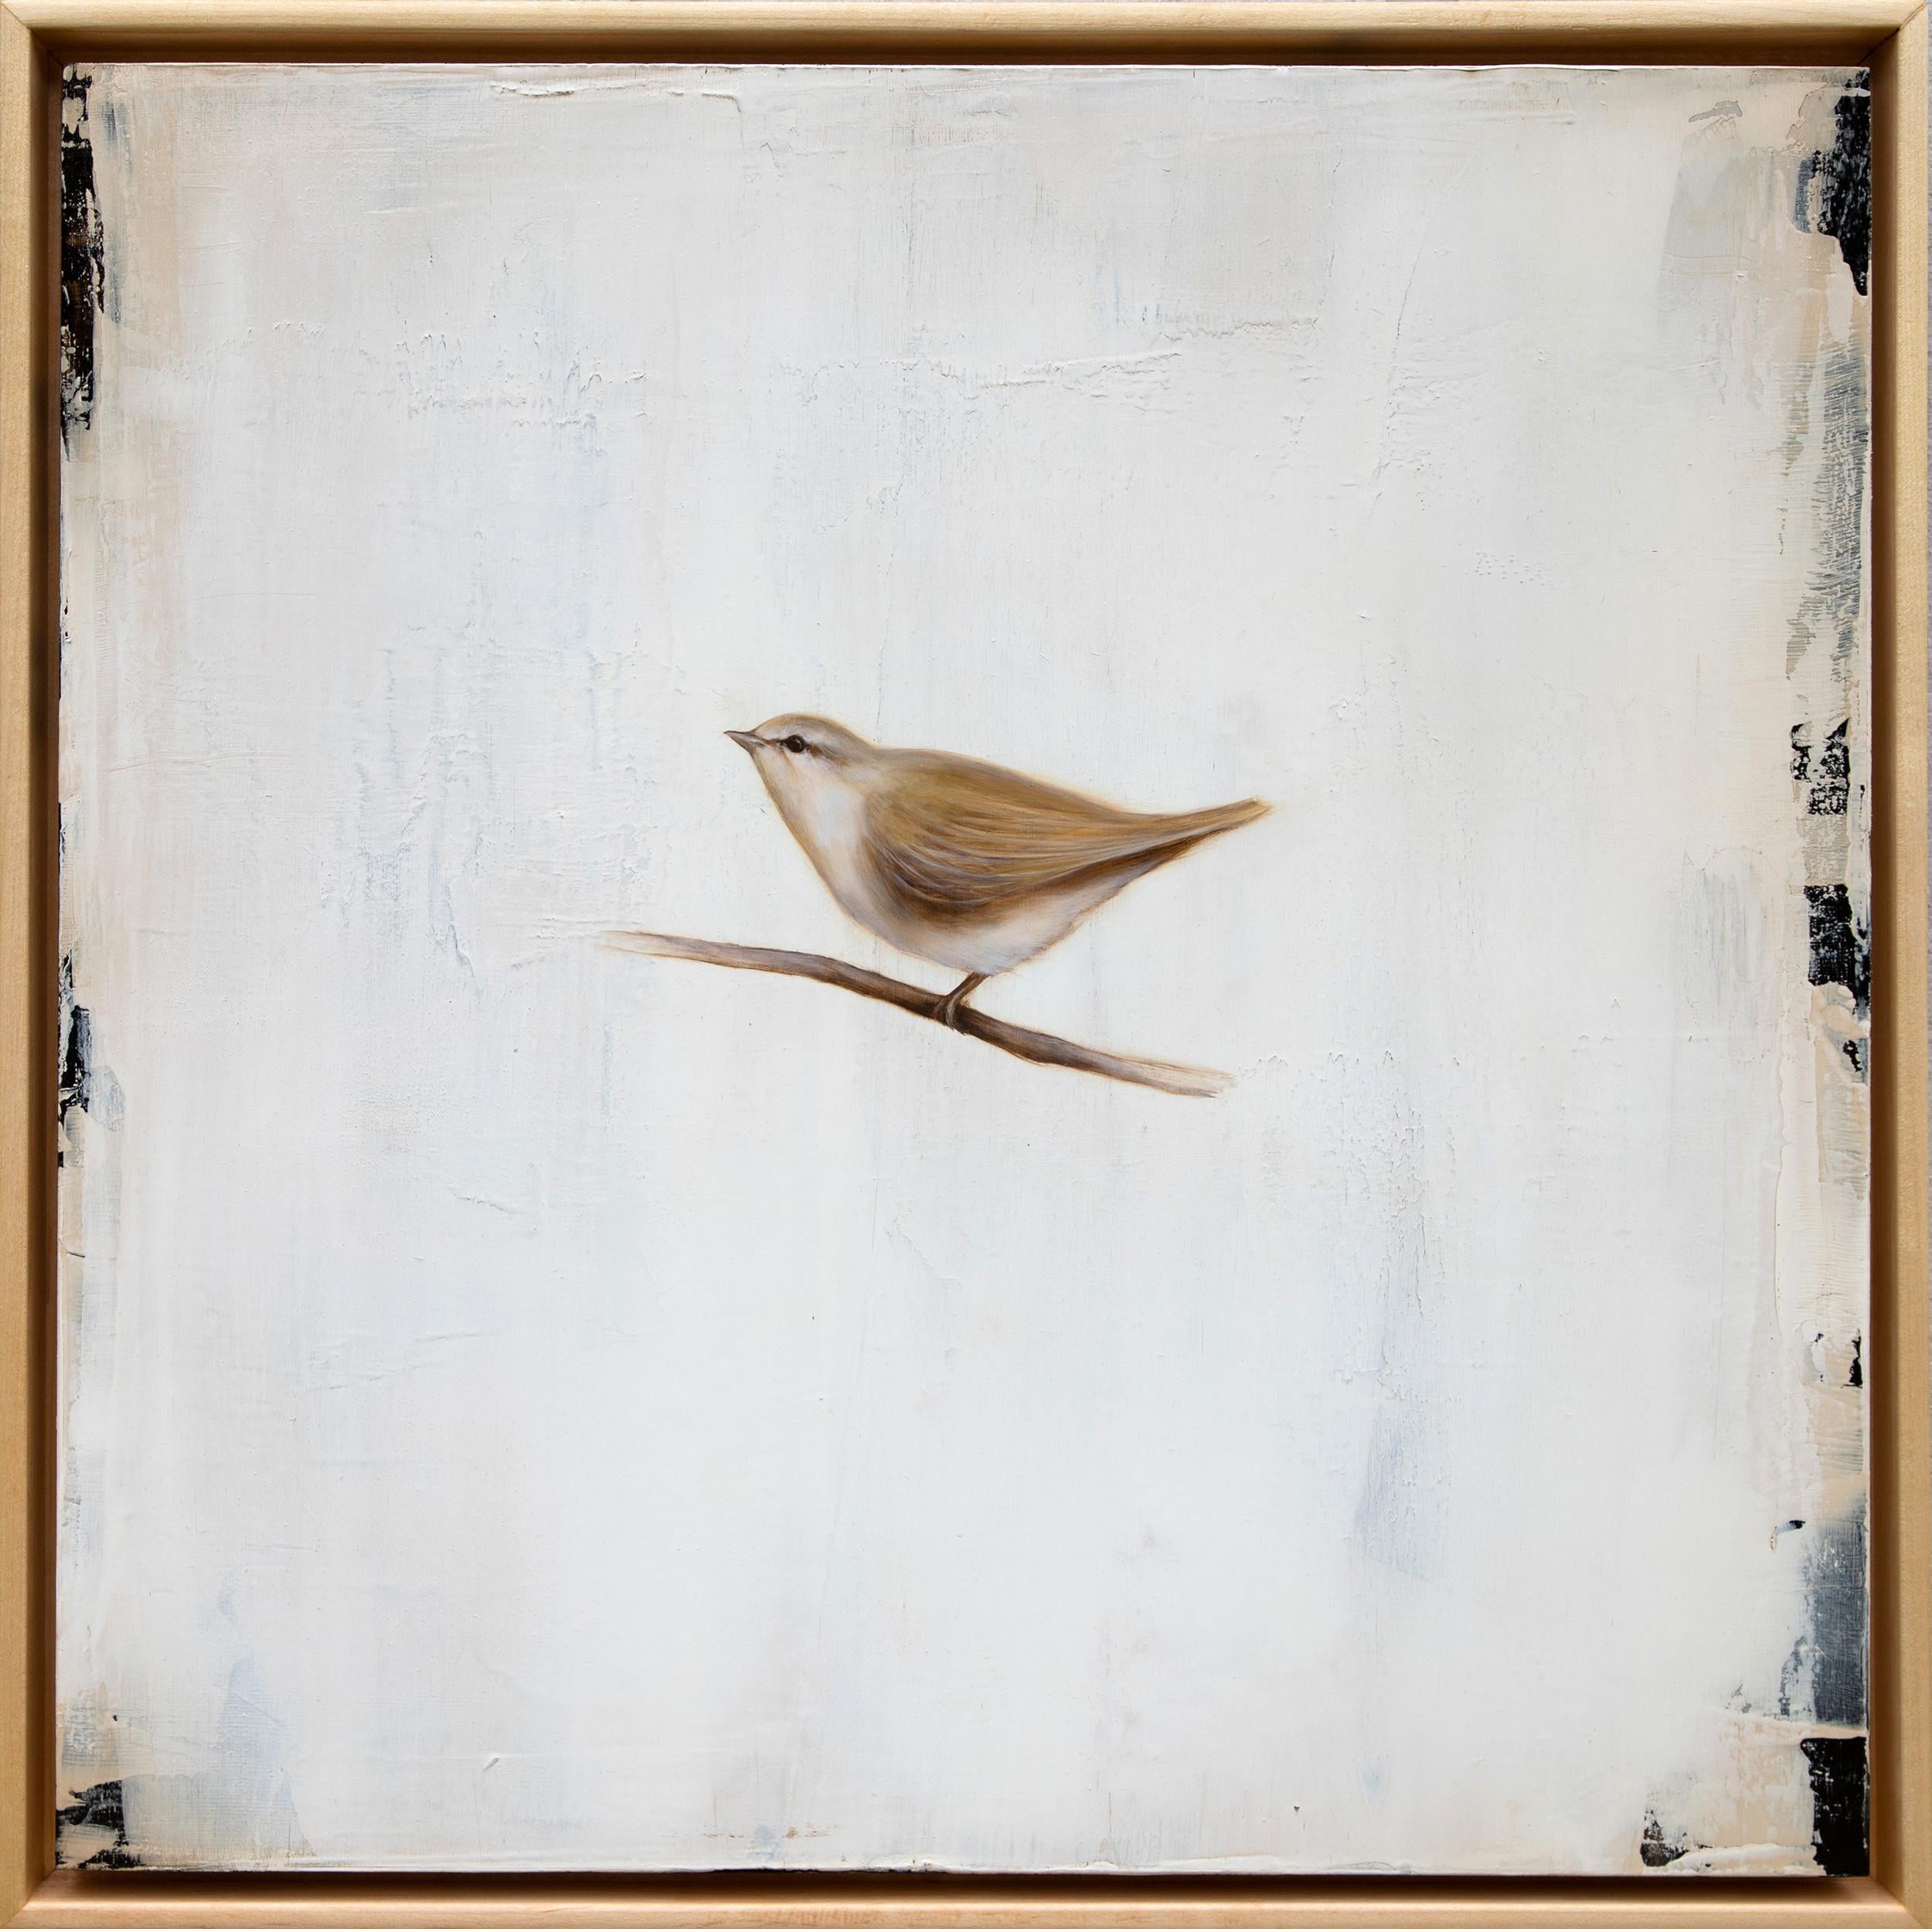 Suspended in Time III by Jessica Pisano, Contemporary Bird Painting on Board